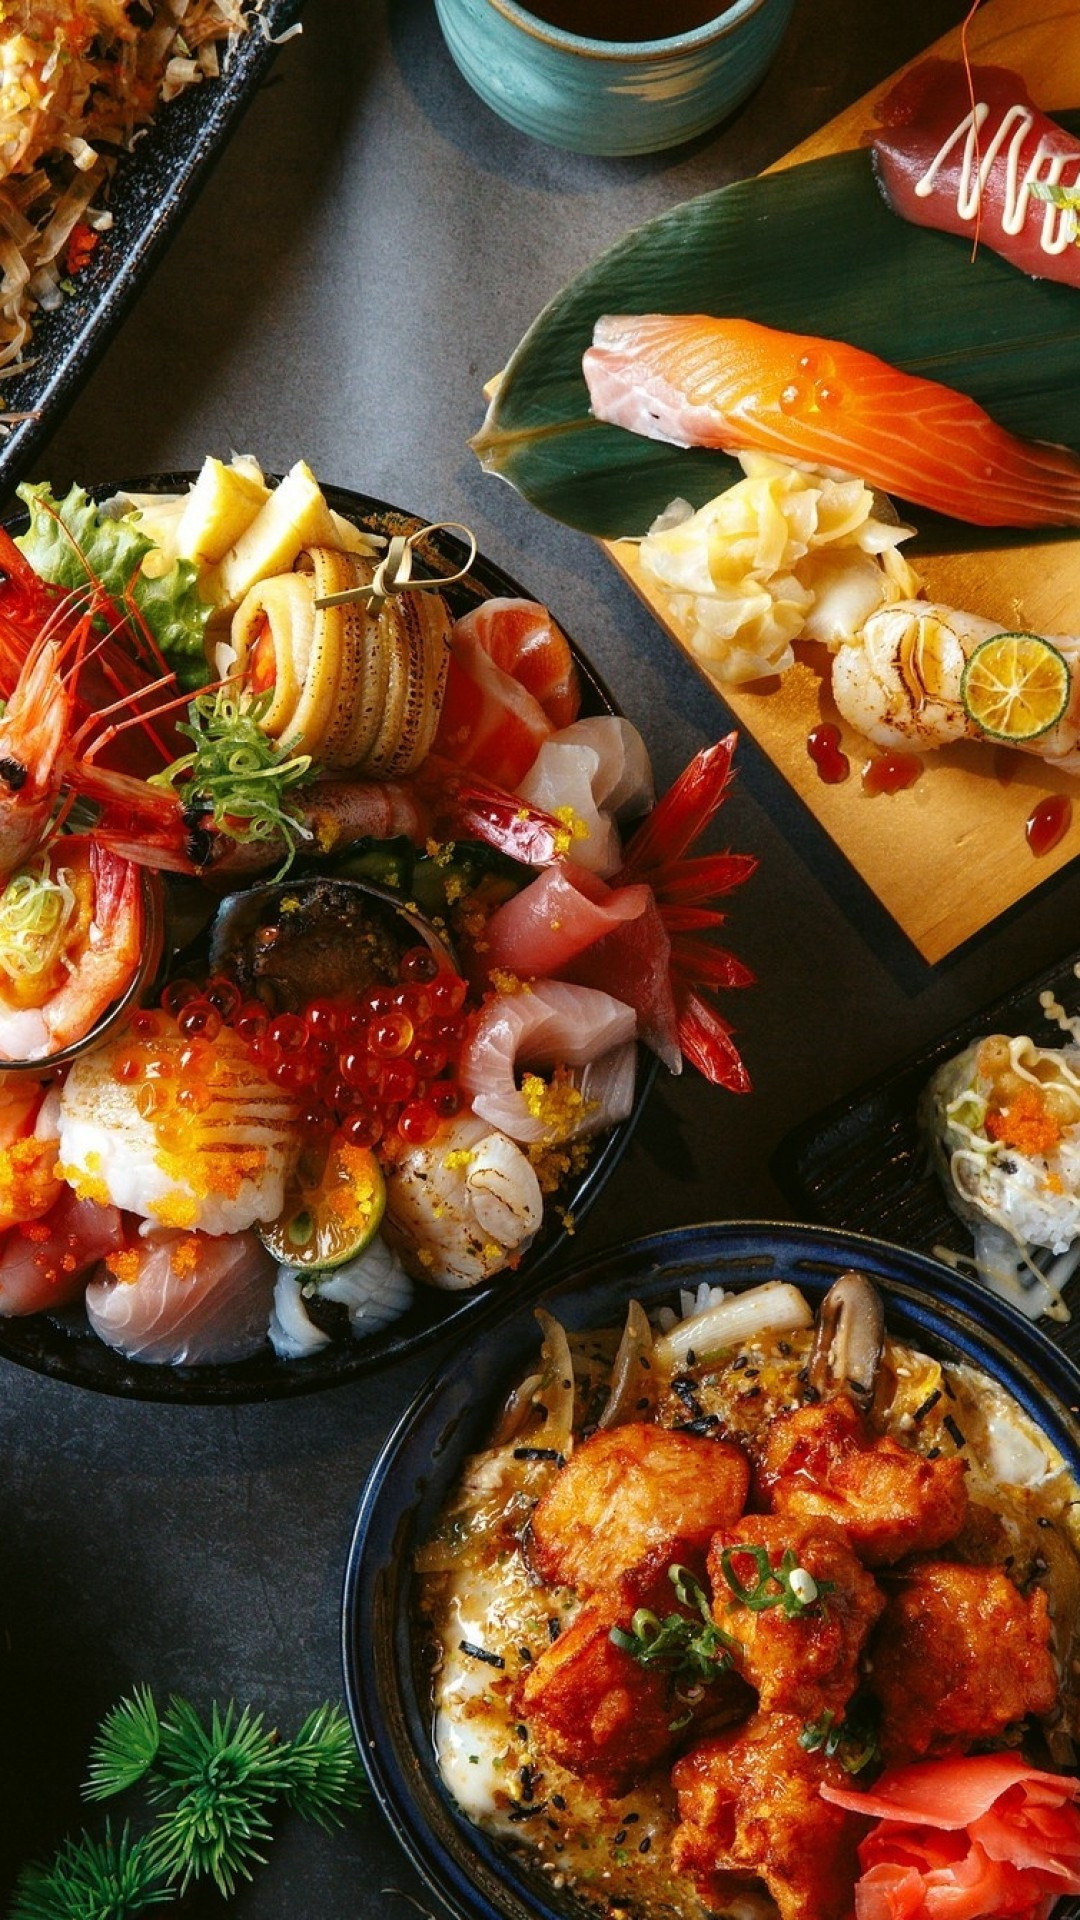 Seafood: Asian Cuisine, Manila, Mussles, Scallops, Oysters. 1080x1920 Full HD Wallpaper.